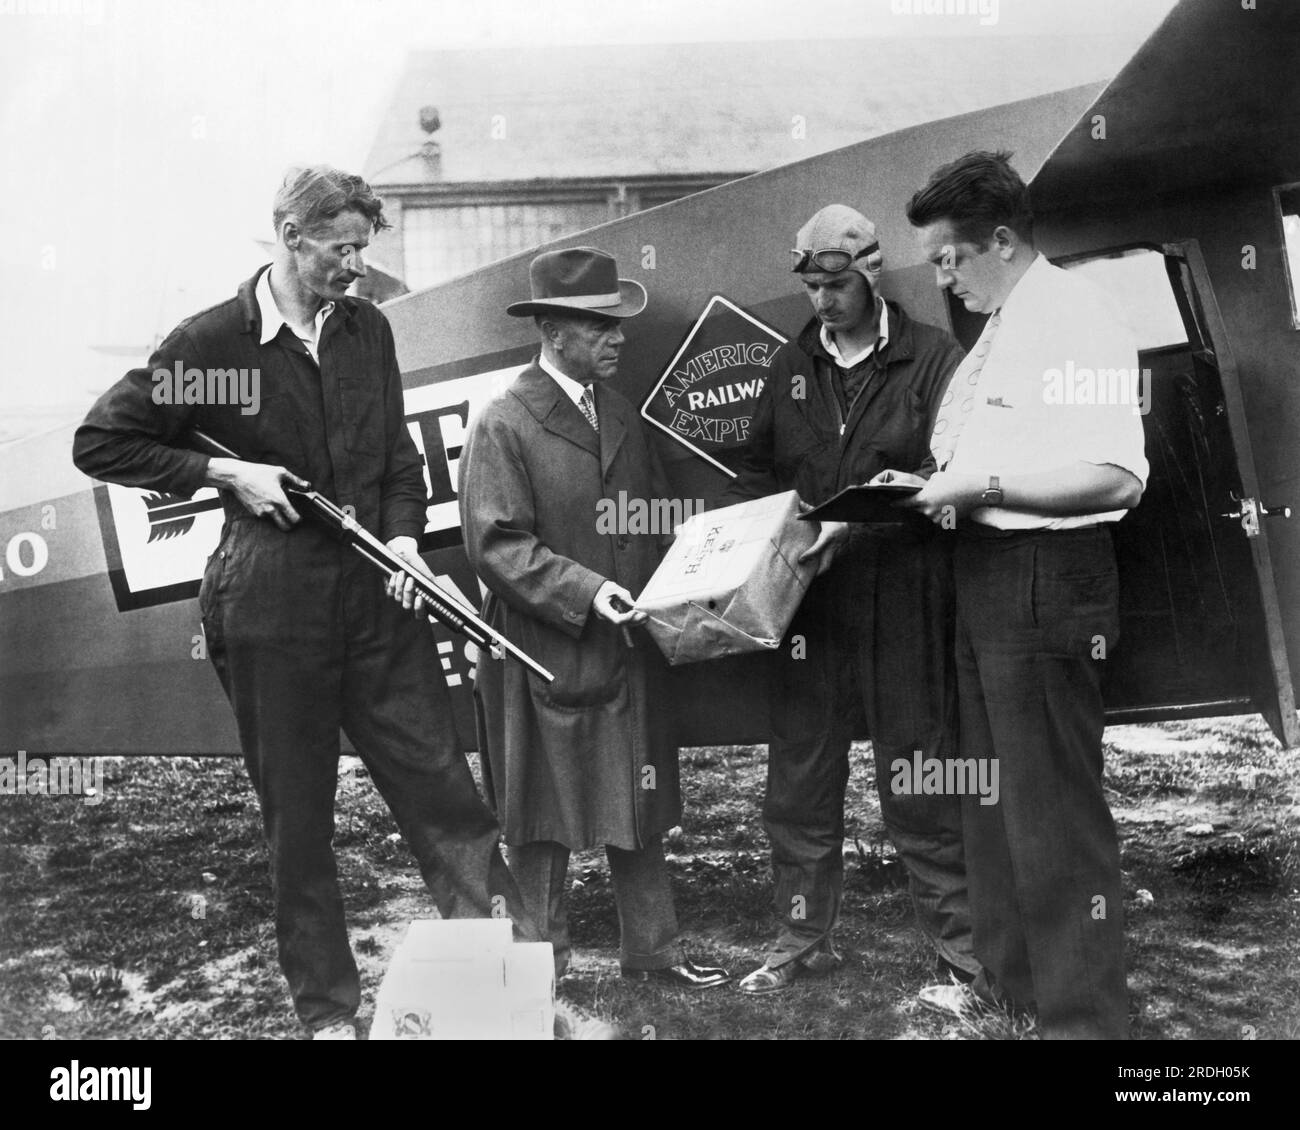 United States:   c. 1928 Workers with rifles and clipboards loading packages for secure shipment on a National Air Transport plane for delivery under the Air Express Division of the American Railway Express Company. National Air Transport was a forerunner of United Air Lines. Stock Photo